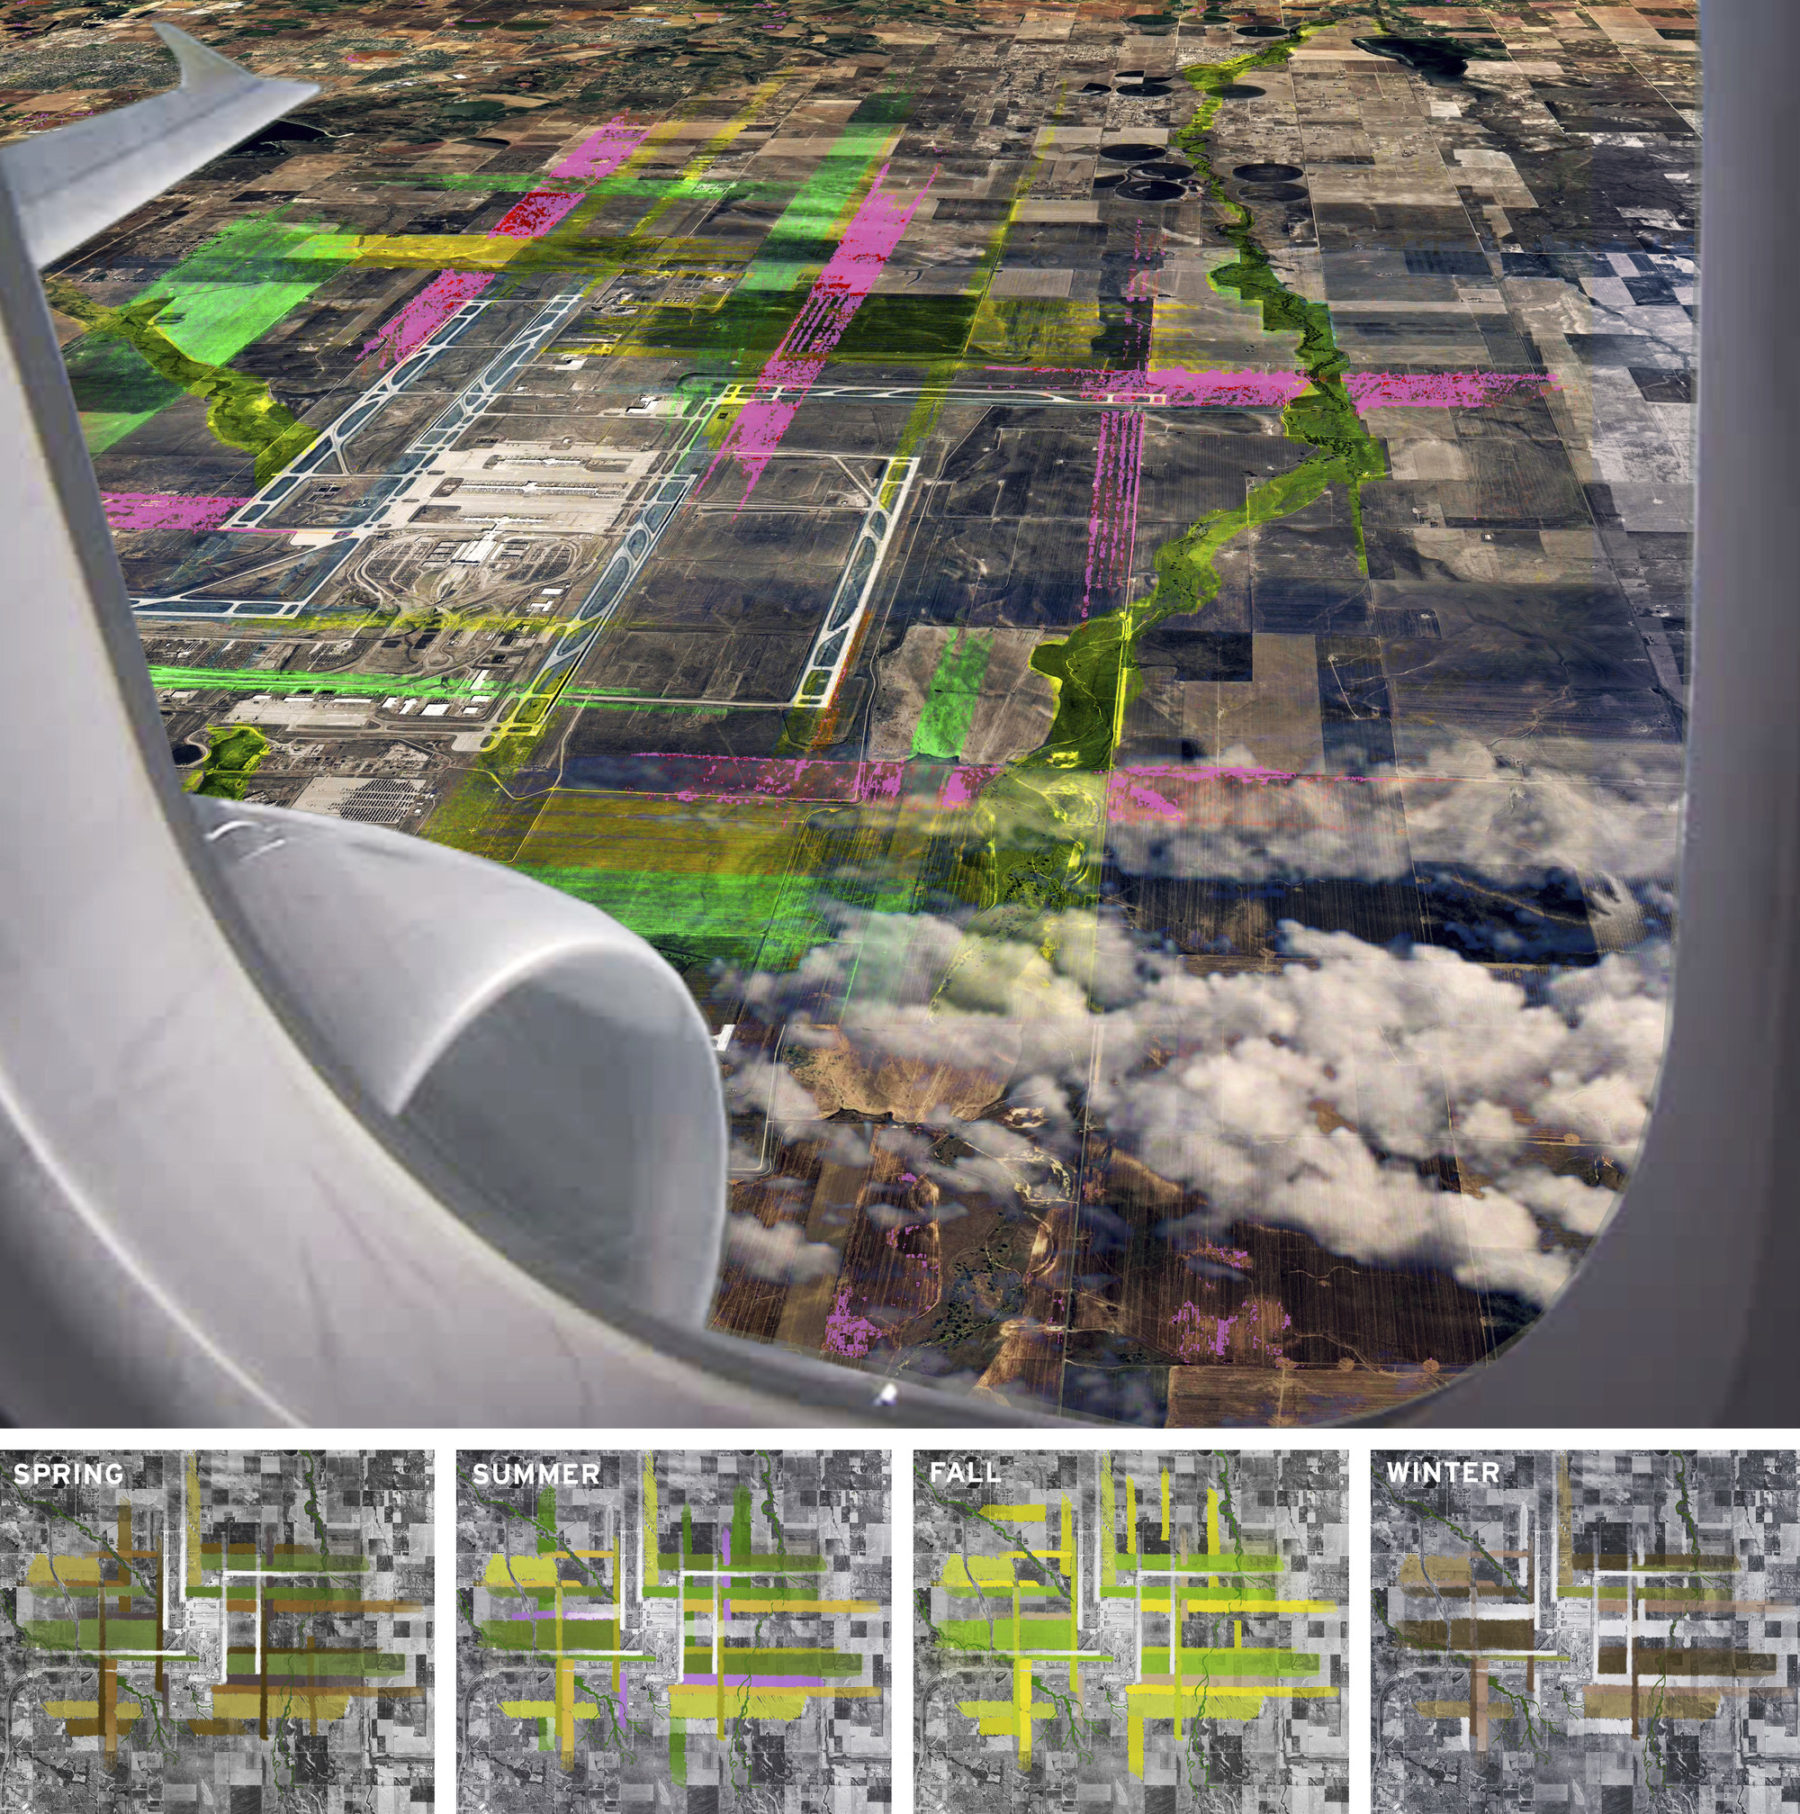 Rendering of site from an airplane